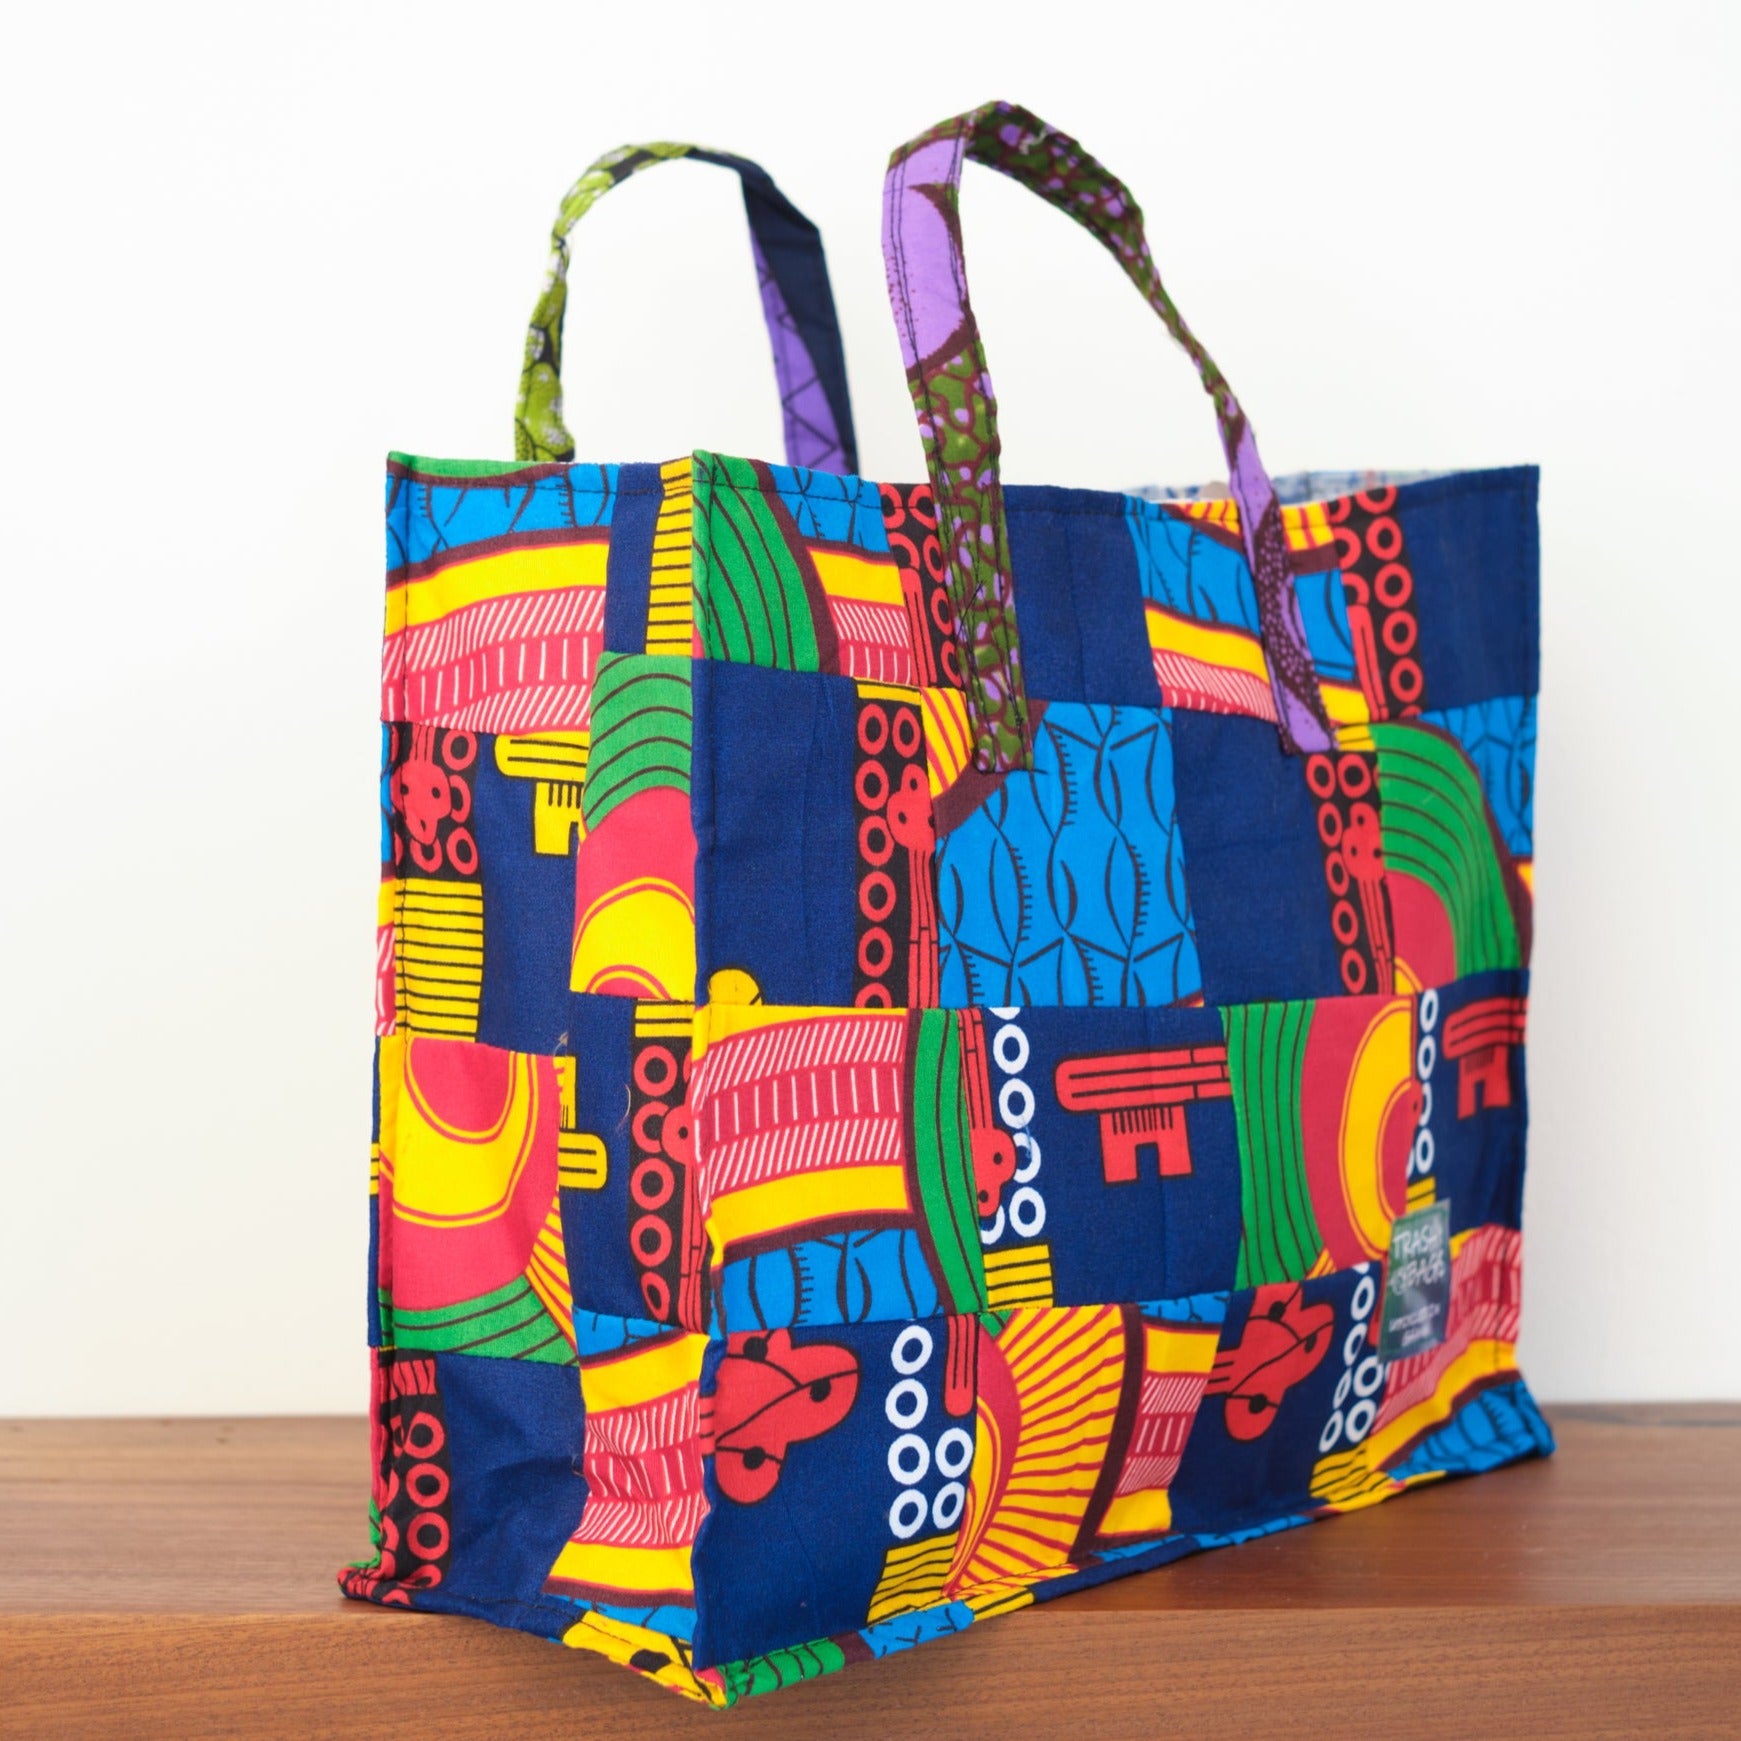 Trashy Bags Africa Recycled Fabric Tote Shopper Bag